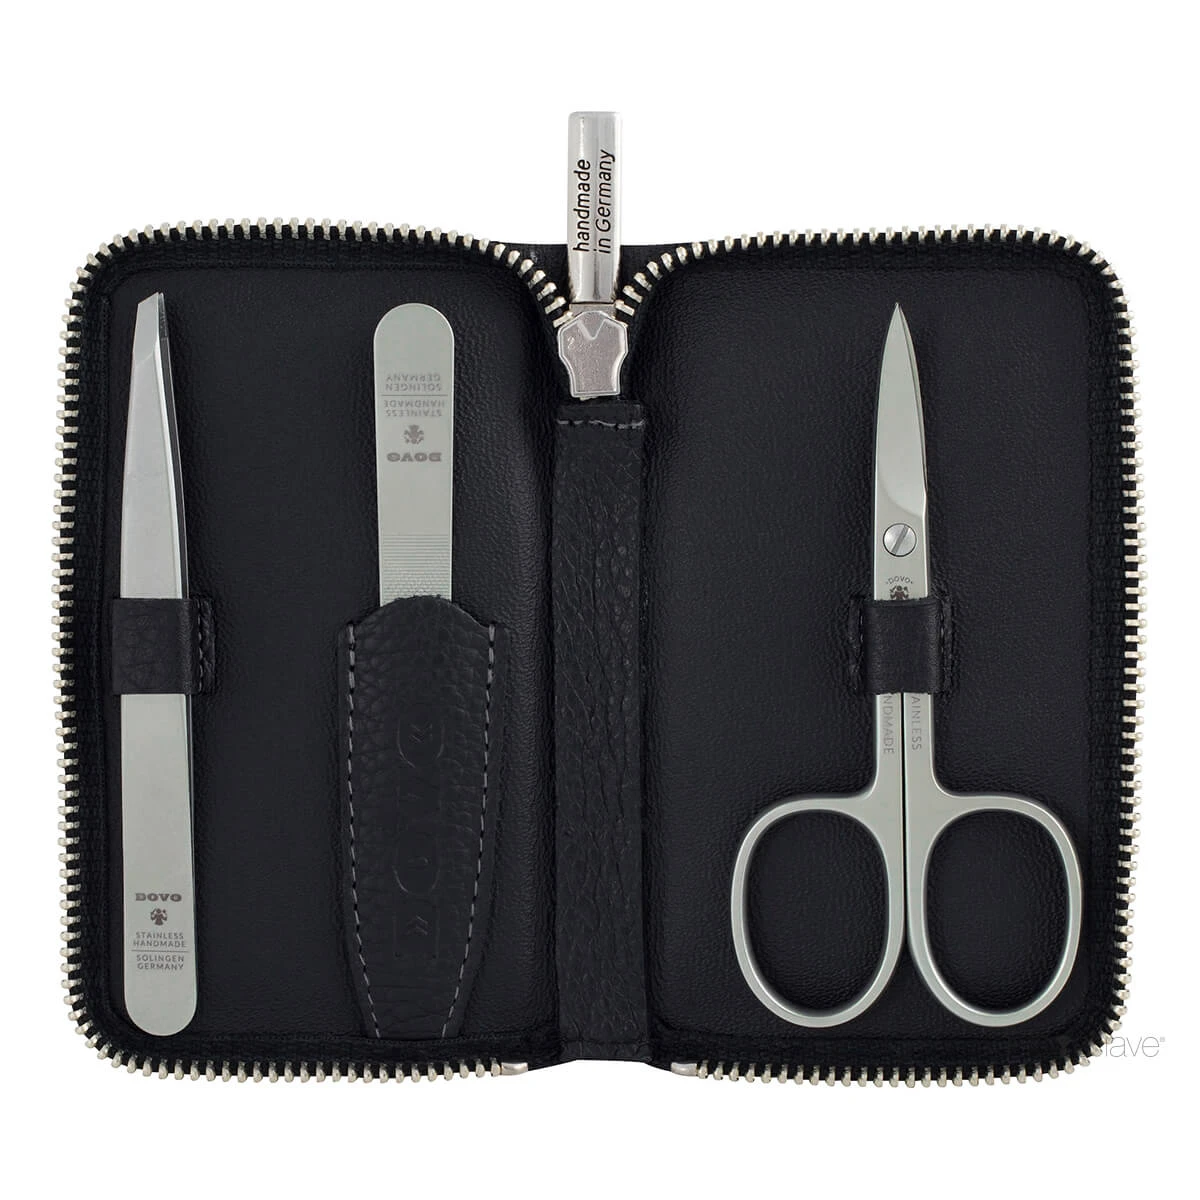 Dovo Solingen German Steel Deluxe Nail Clippers (Small)